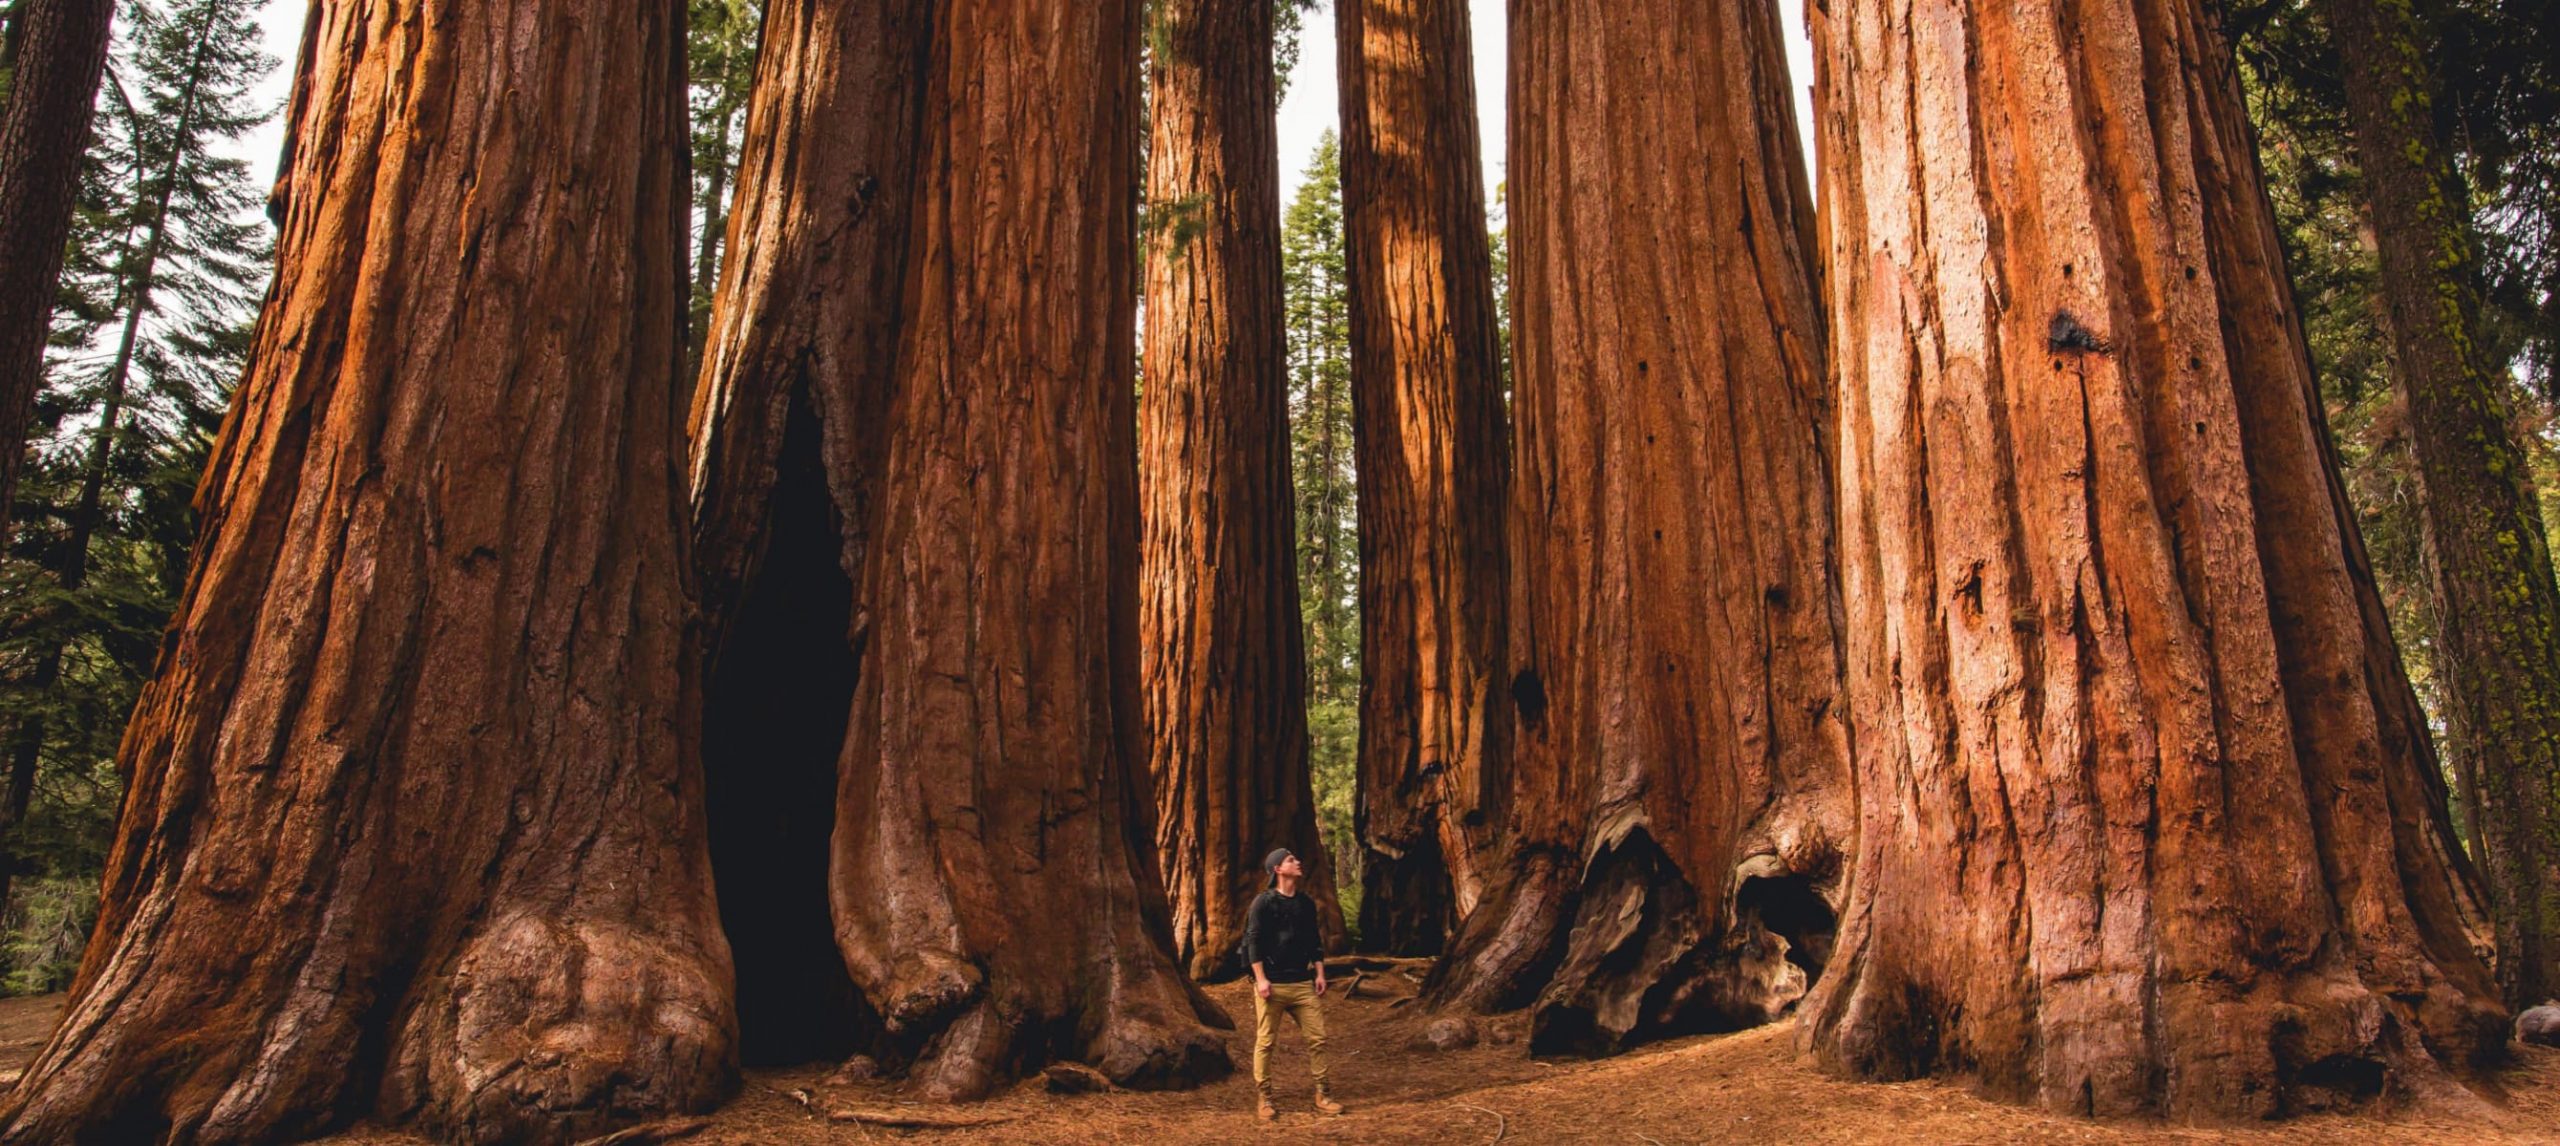 The Ultimate Guide For Visiting The Sequoia National Park, California